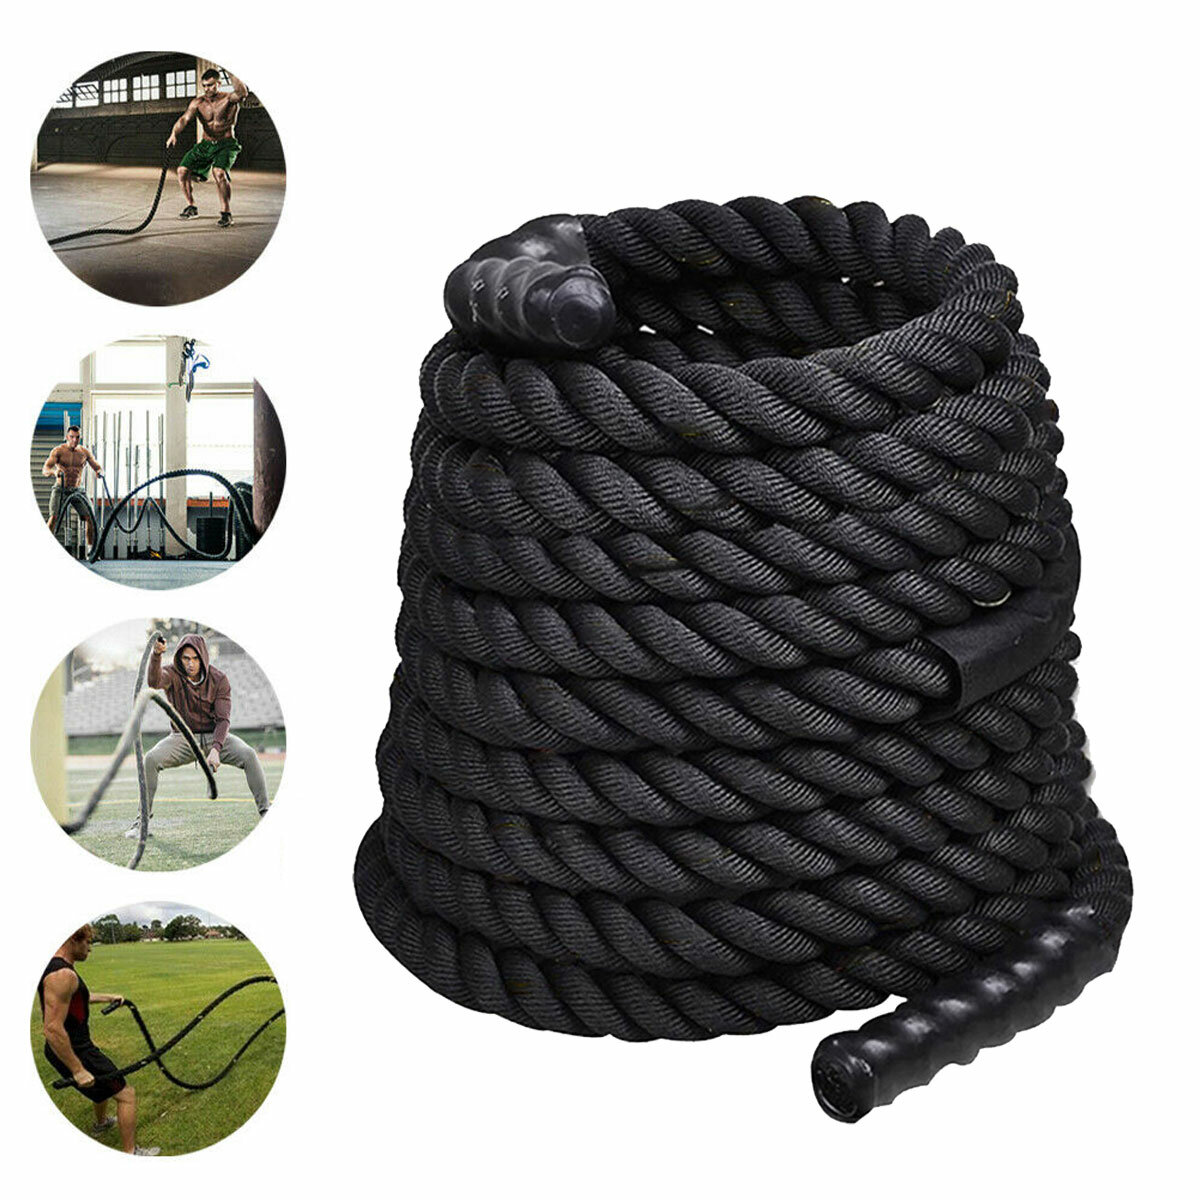 9M Lengte Fitness Battle Rope Heavy Jump Rope Weighted Battle Springtouwen Retainer Gym Oefeningstoo